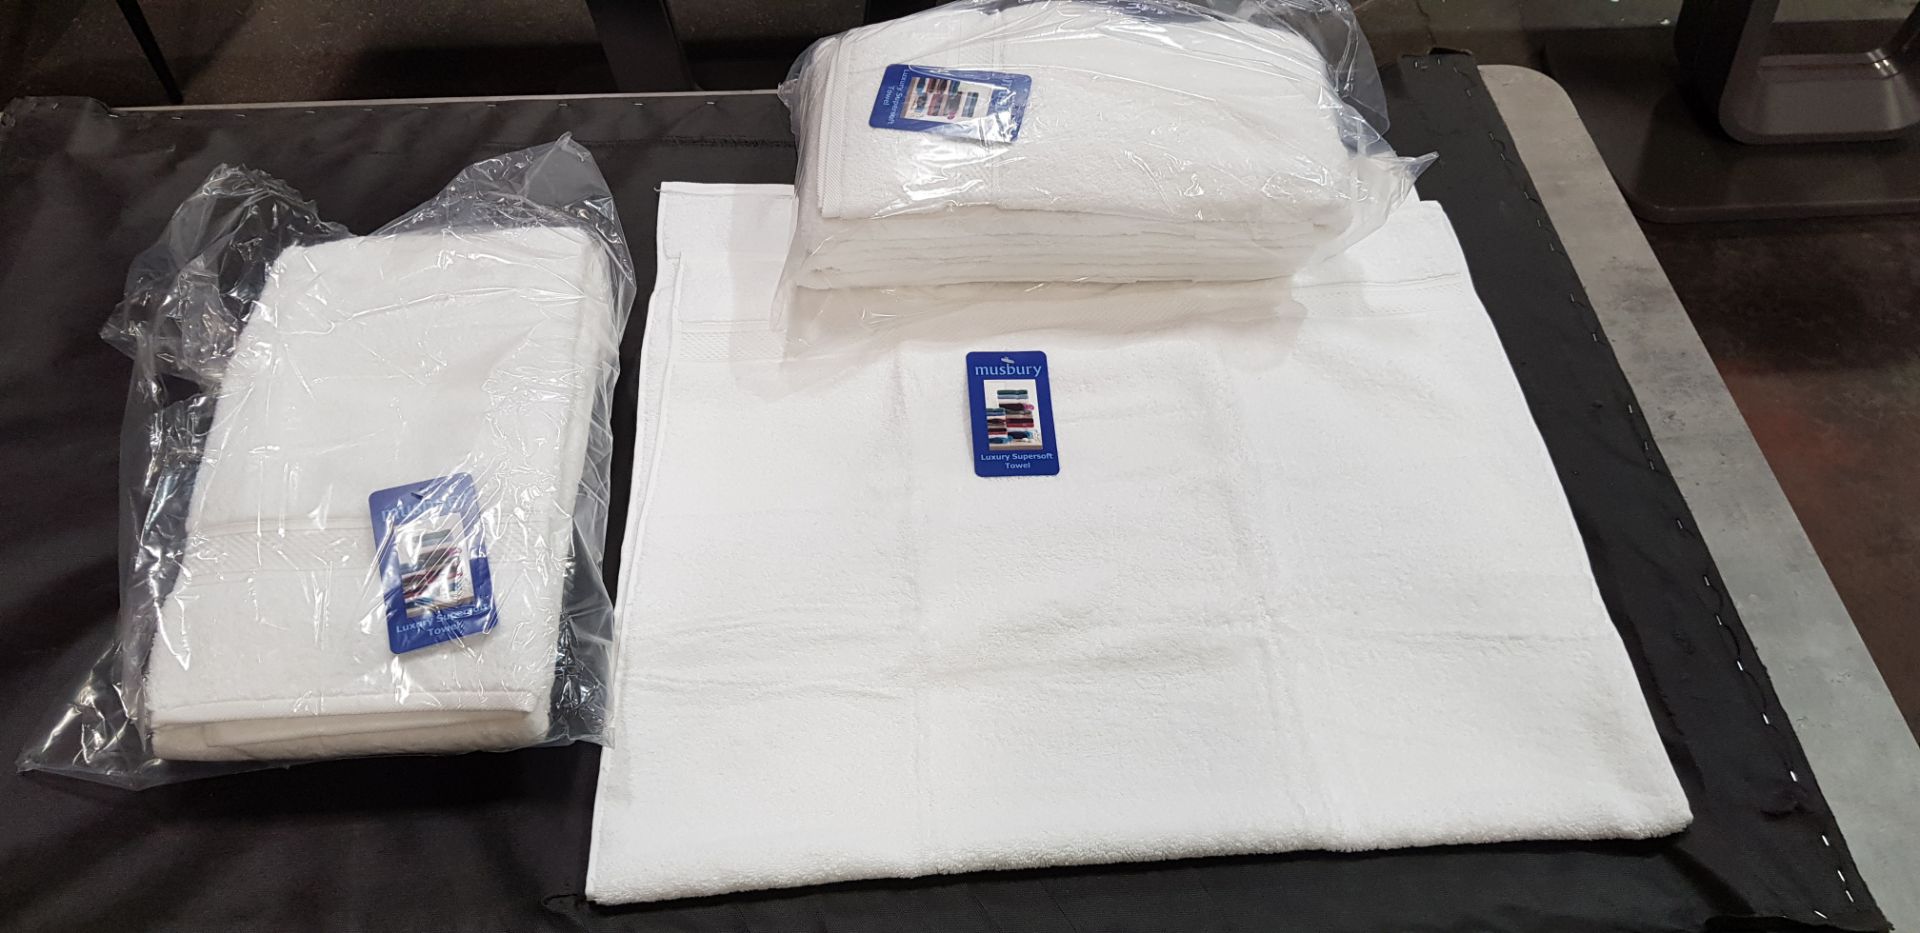 36 X BRAND NEW MUSBURY LUXURY SUPERSOFT TOWELS - ALL IN WHITE COLOUR - ( SIZE : 70 X 127 CM ) - IN 2